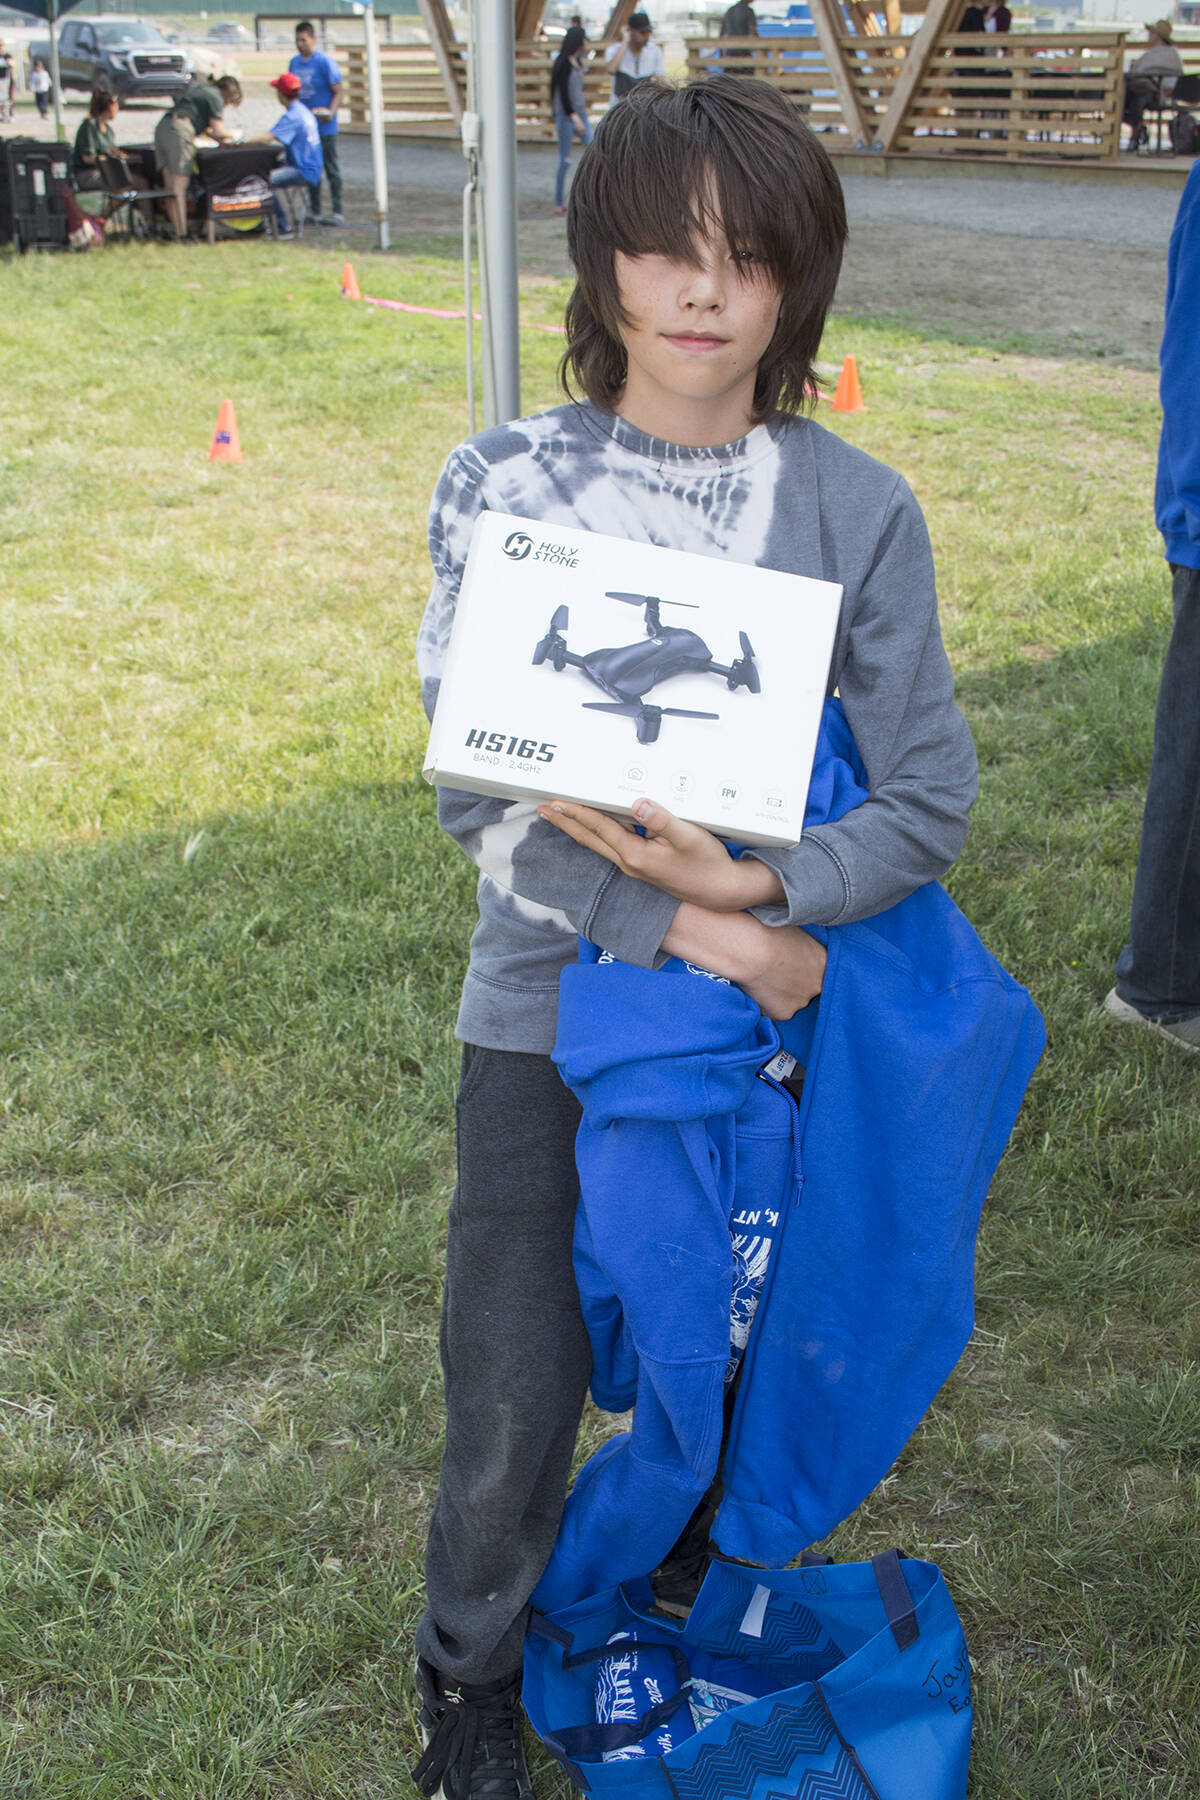 Our Youth of the Week is Jayden Jacobson, who was one of two winners in a contest to design this years World Oceans Day logo. Jaydens design was on a cake made specifically to commemorate the event, and he was awarded a drone for his efforts. Who says art doesnt pay?